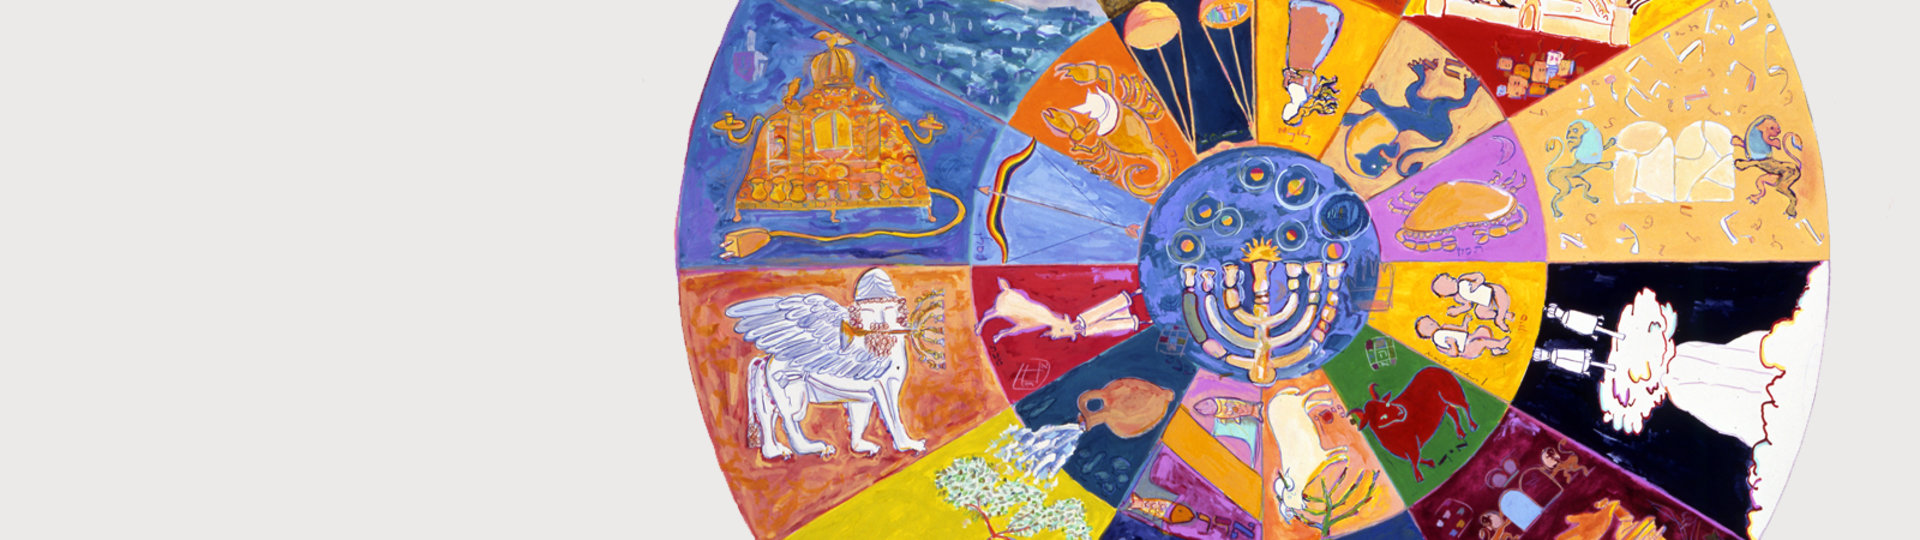 Mark Podwal's Zodiac Circle, 1995. Gouache, ink, and colored pencil on paper